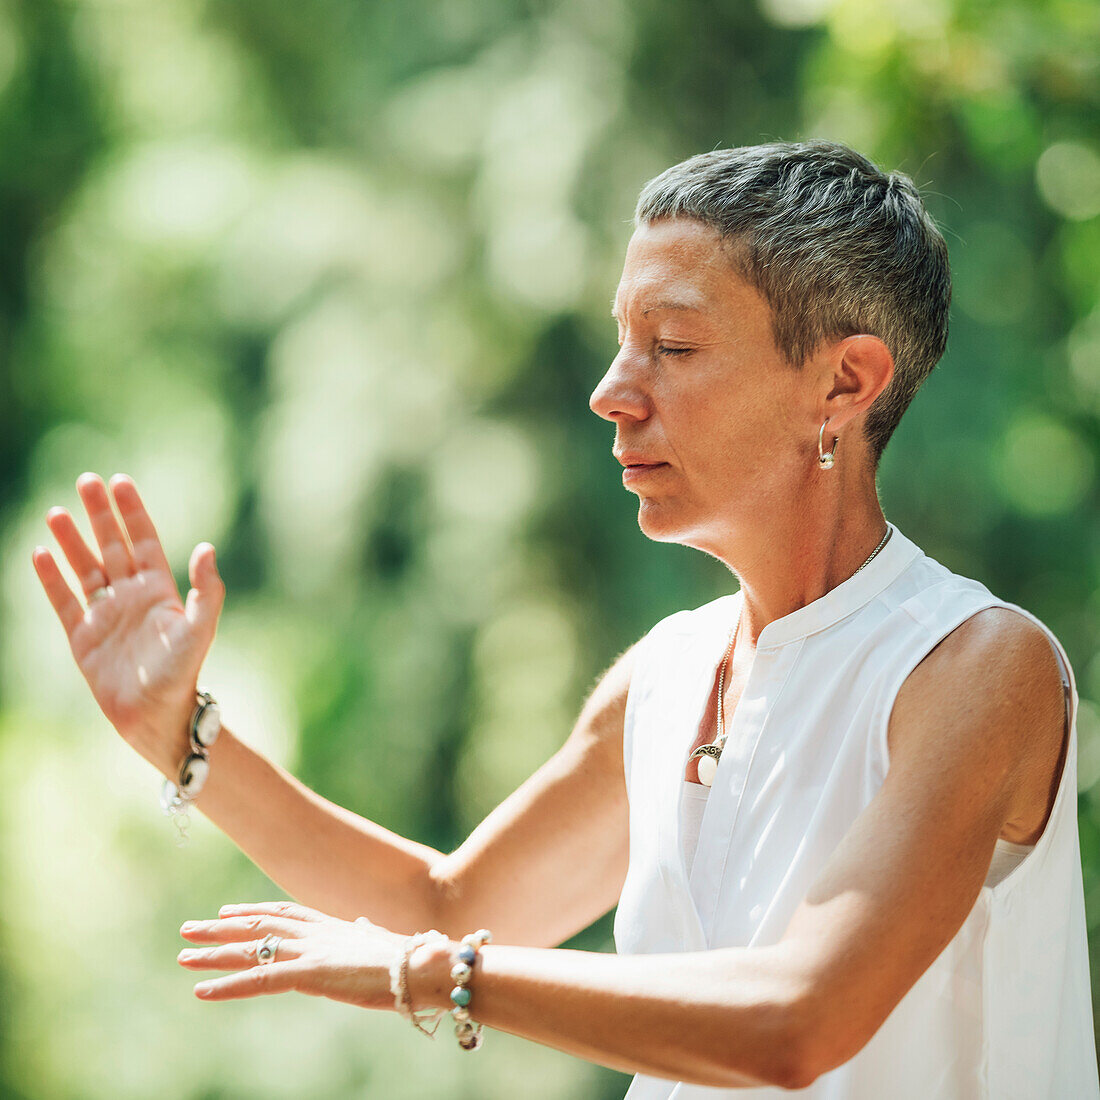 Woman practicing qigong in a forest